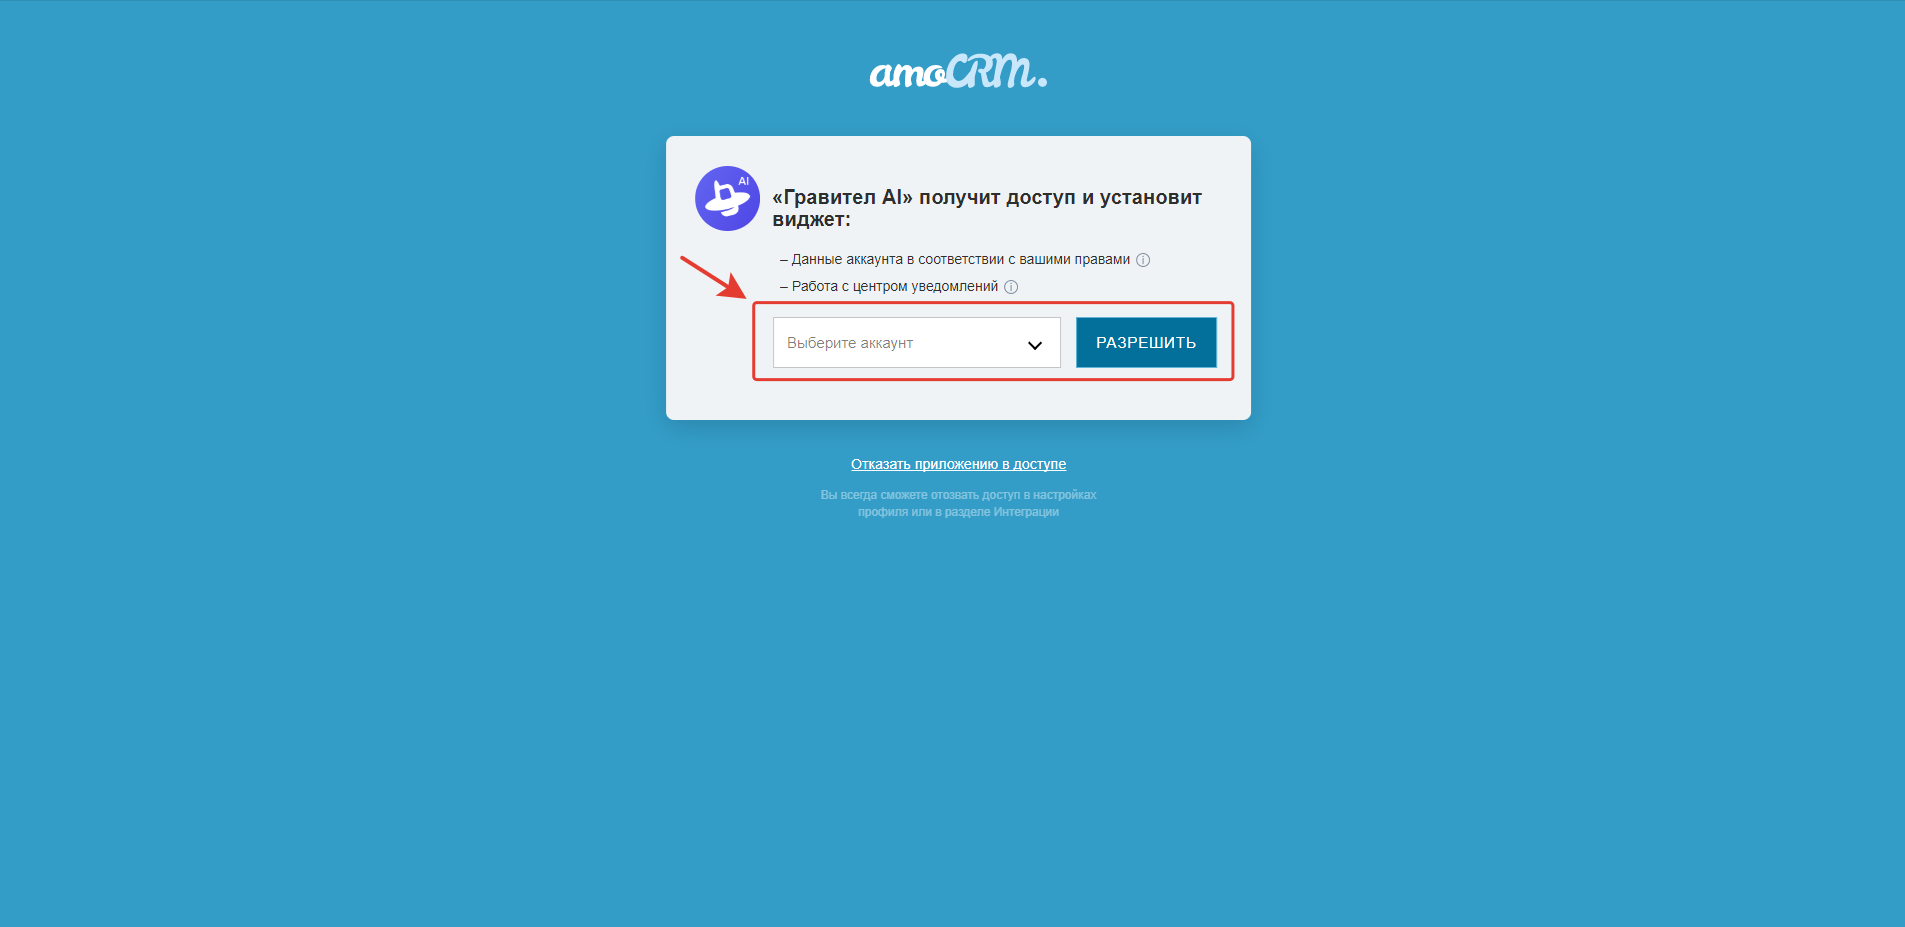 amoCRM_3.png